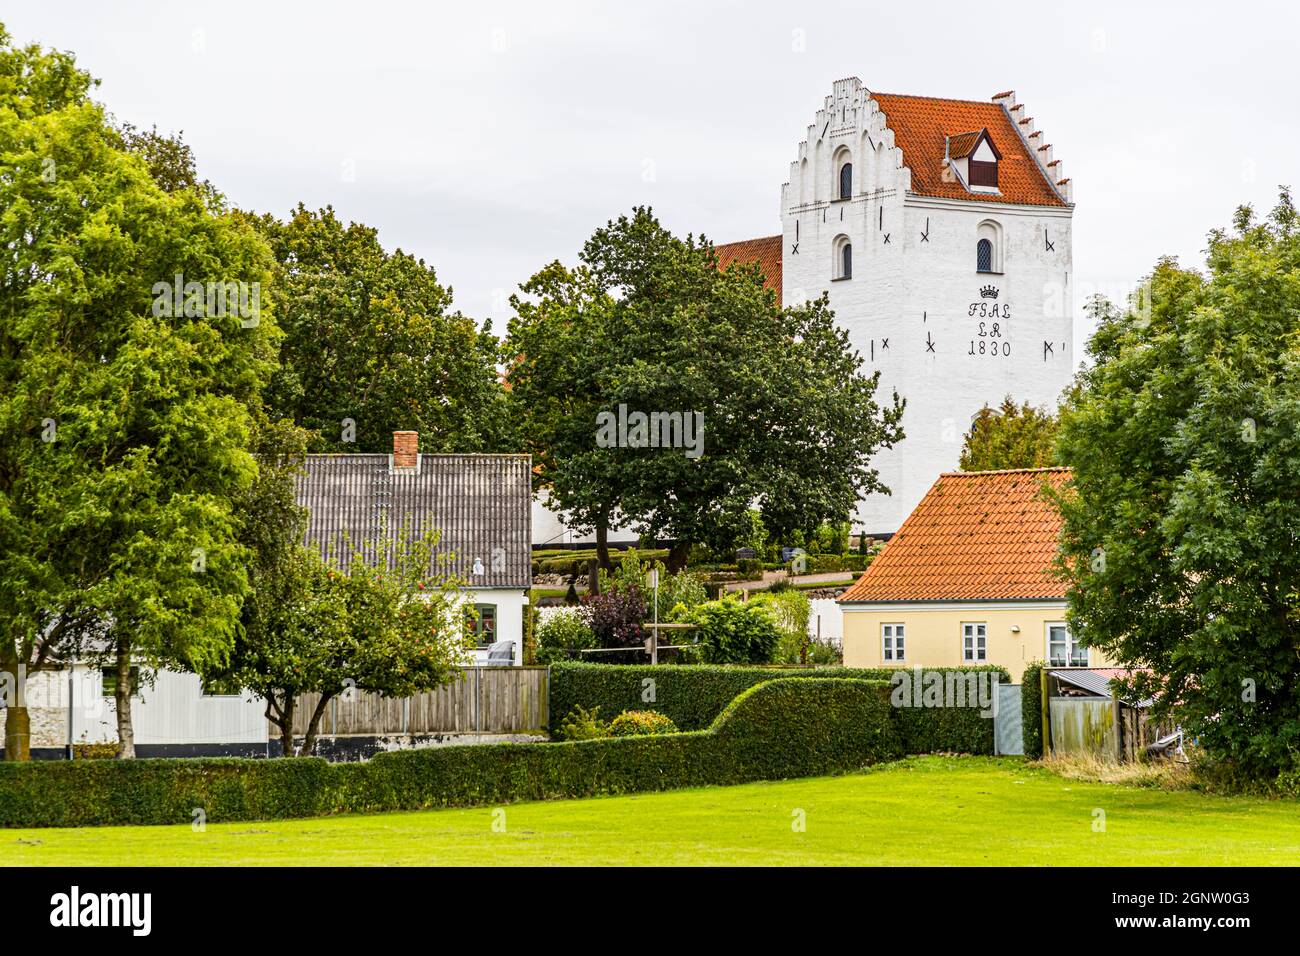 All churches in the Fyn Archipelago are snow-white and have red roofs. The church of Tullebølle on Langeland is one of the most beautiful. It dates from the Middle Ages, the year 1830 marks the year of renovation. Tullebølle, Langeland, Denmark Stock Photo